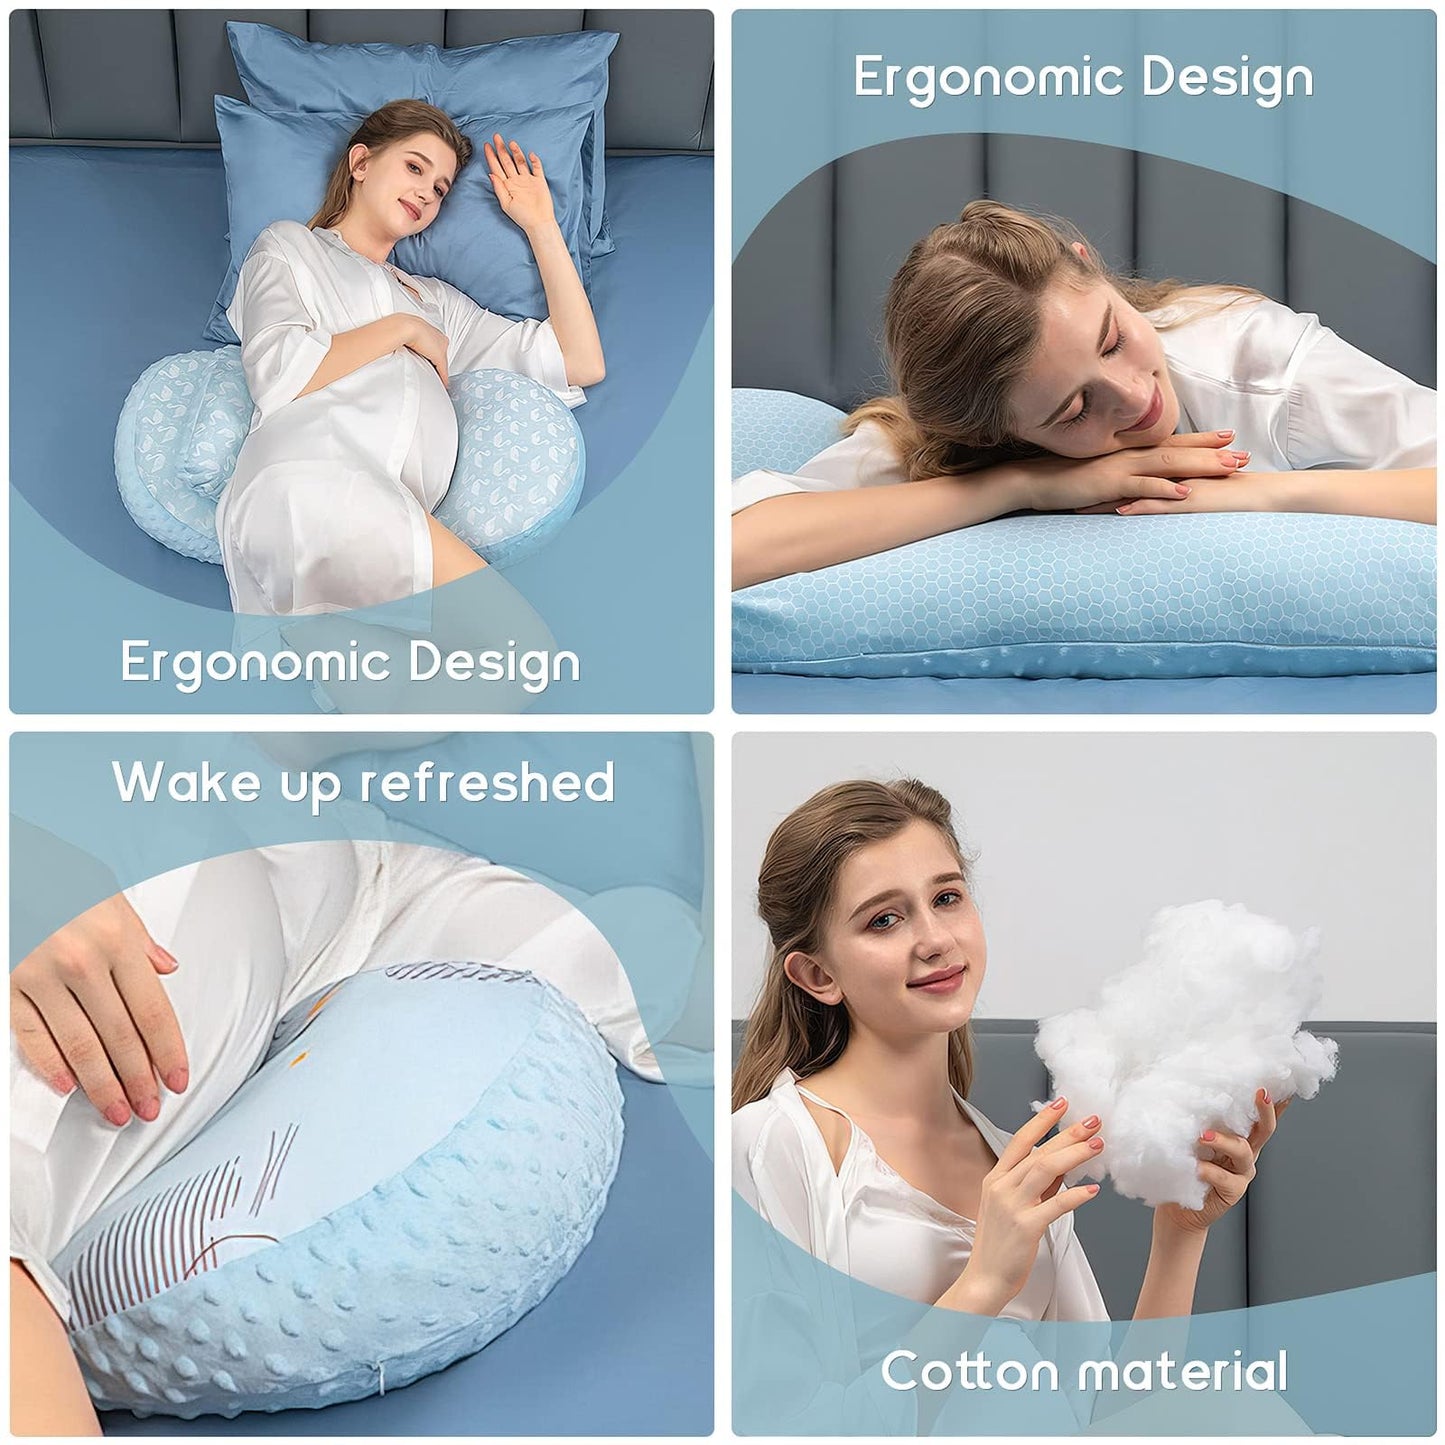 Busarilar Pregnancy Pillows for Sleeping, Maternity Pillow, Pregnancy Body Pillow Support for Back, Legs, Belly, Hips of Pregnant Women, Detachable and Adjustable with Pillow Cover (Pinky, Small)